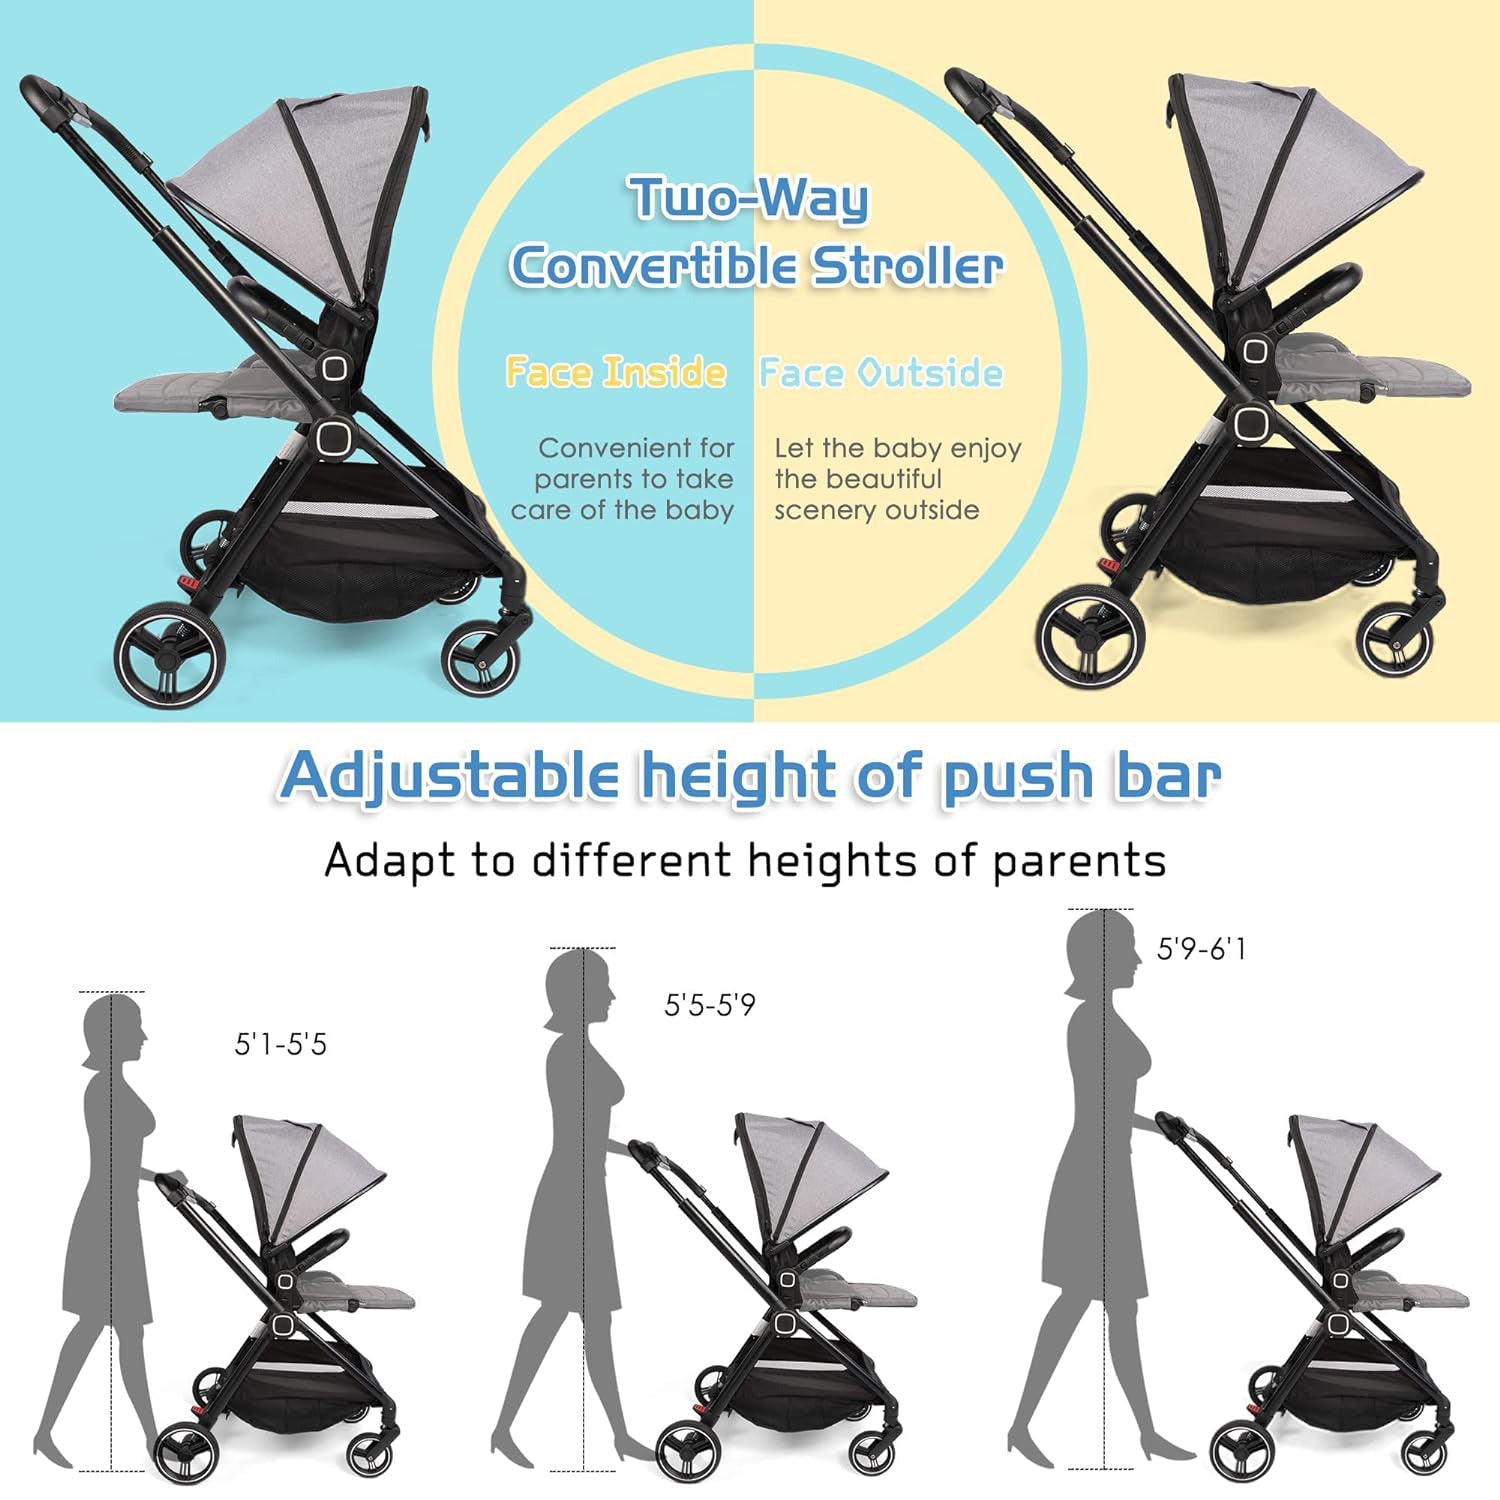 Easy Fold Baby Stroller Lightweight High Landscape Infant Pushchair with Reversible Seat, Gray